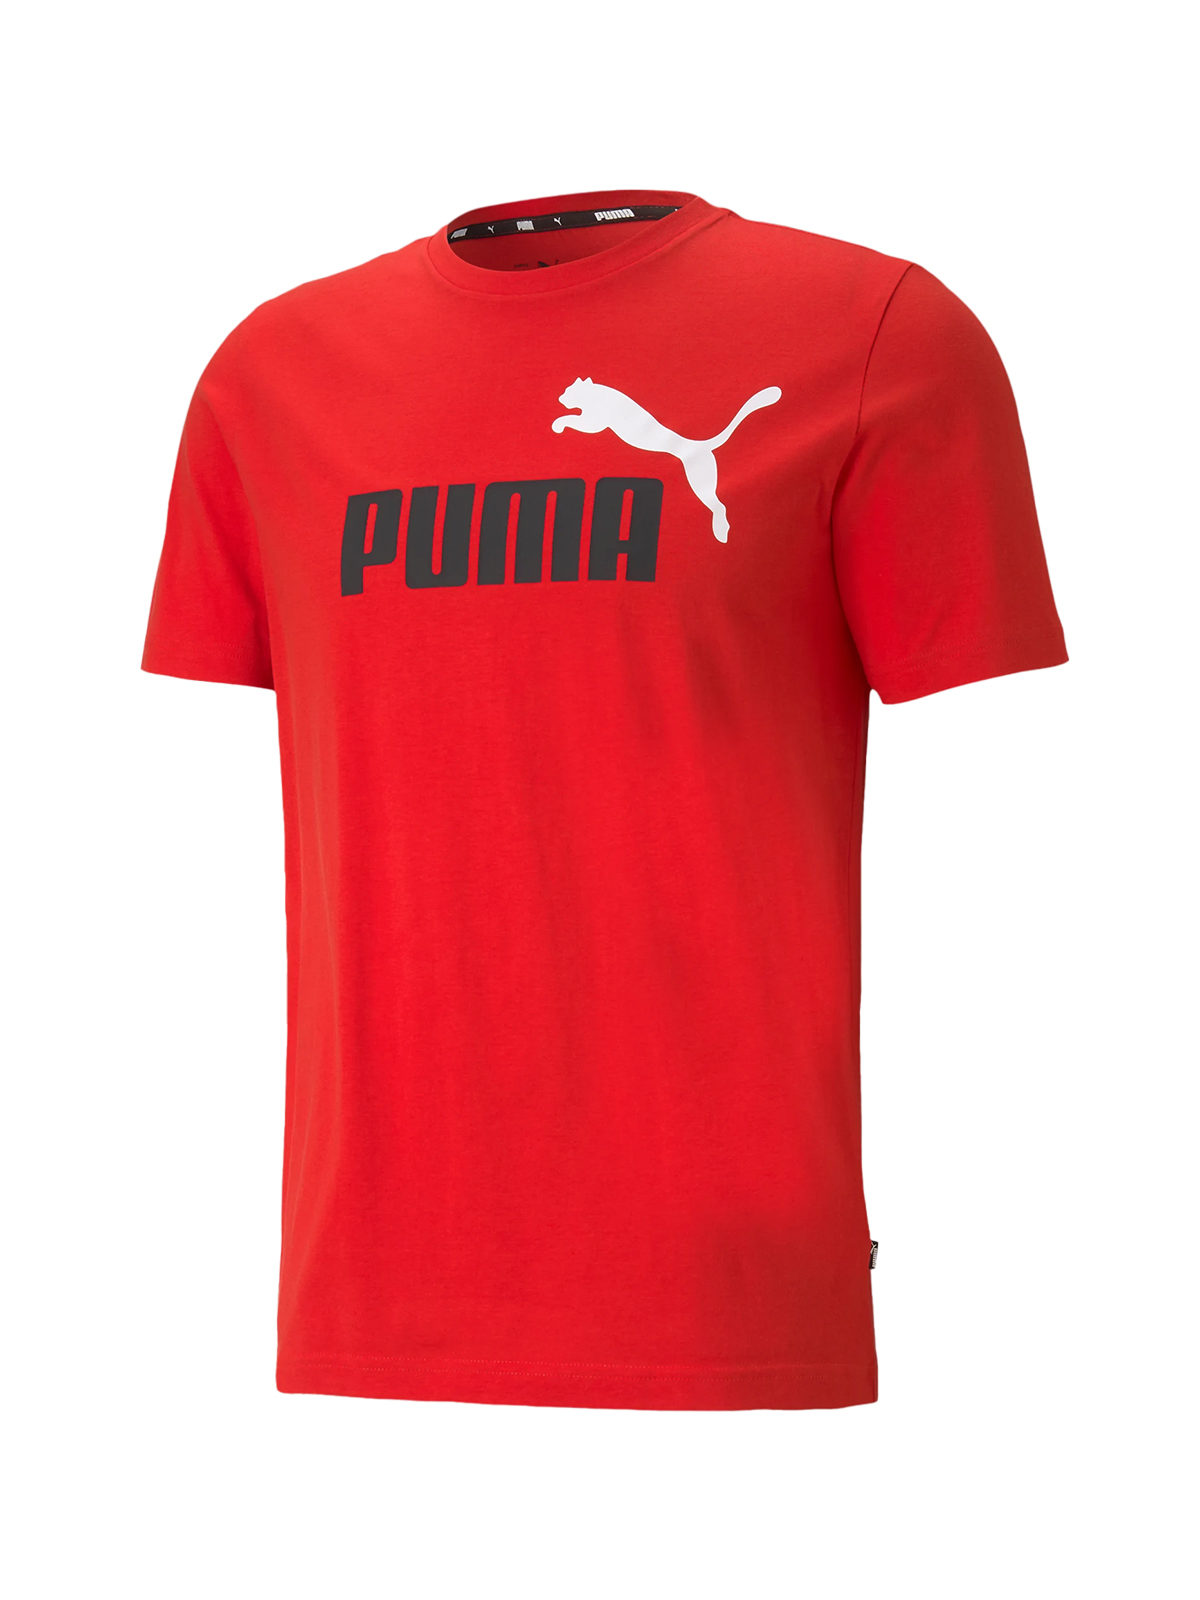 Puma ESS + 2 short sleeve COL T-shirt: LOGO on TEE at Men\'s 20.69€ sale for